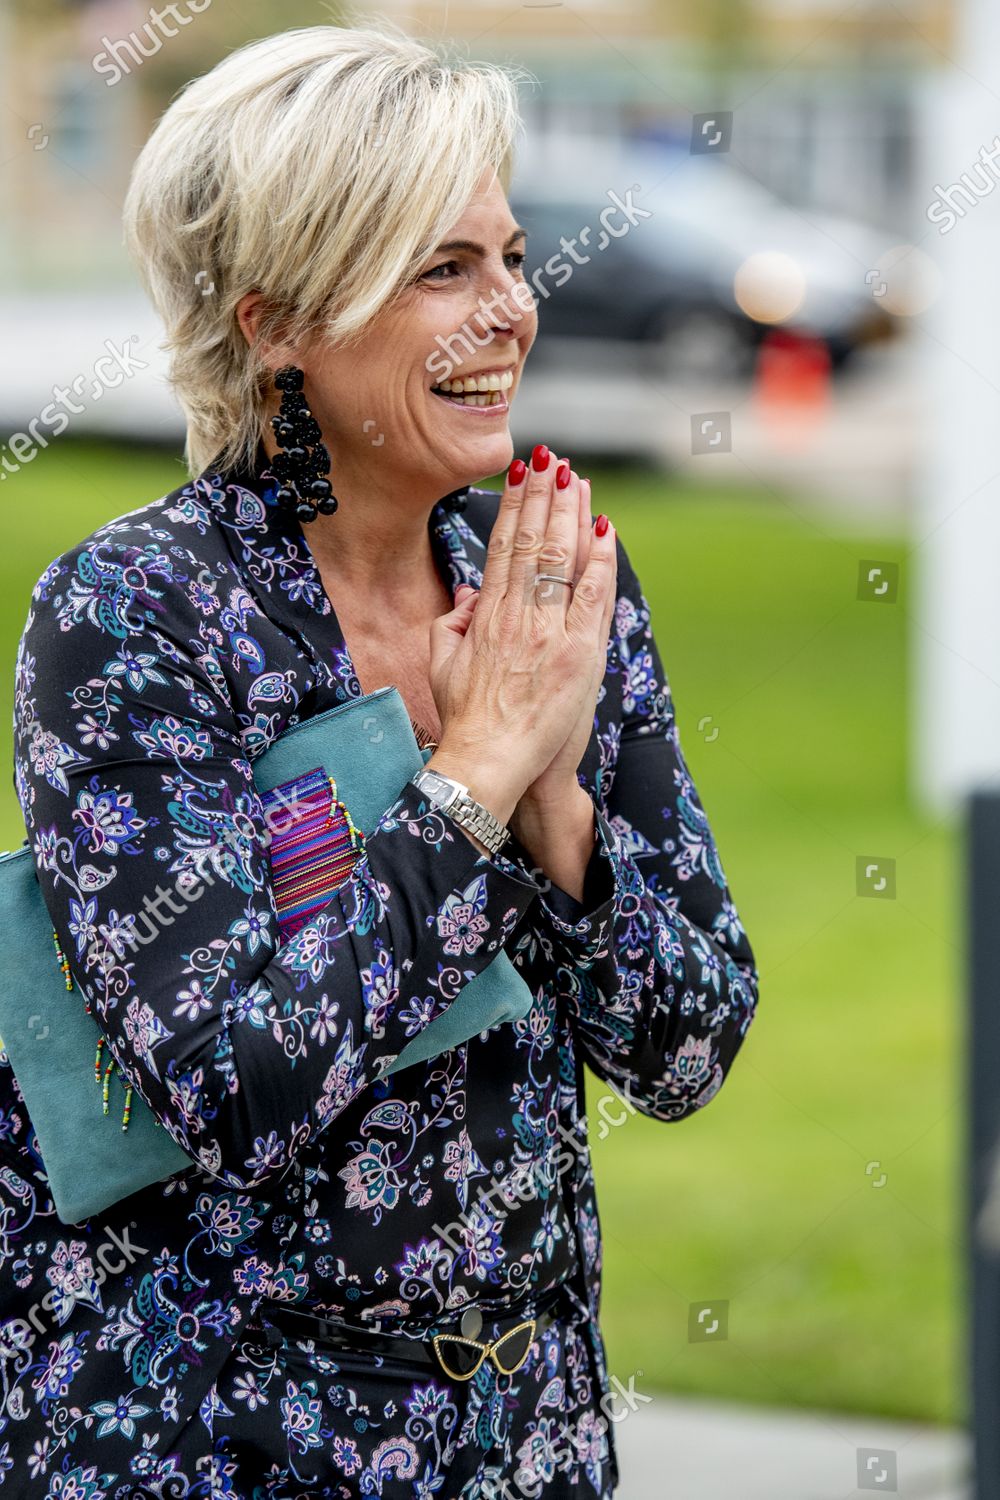 princess-laurentien-attends-a-coronavirus-proof-live-conference-fokker-terminal-the-hague-the-netherlands-shutterstock-editorial-10697685i.jpg